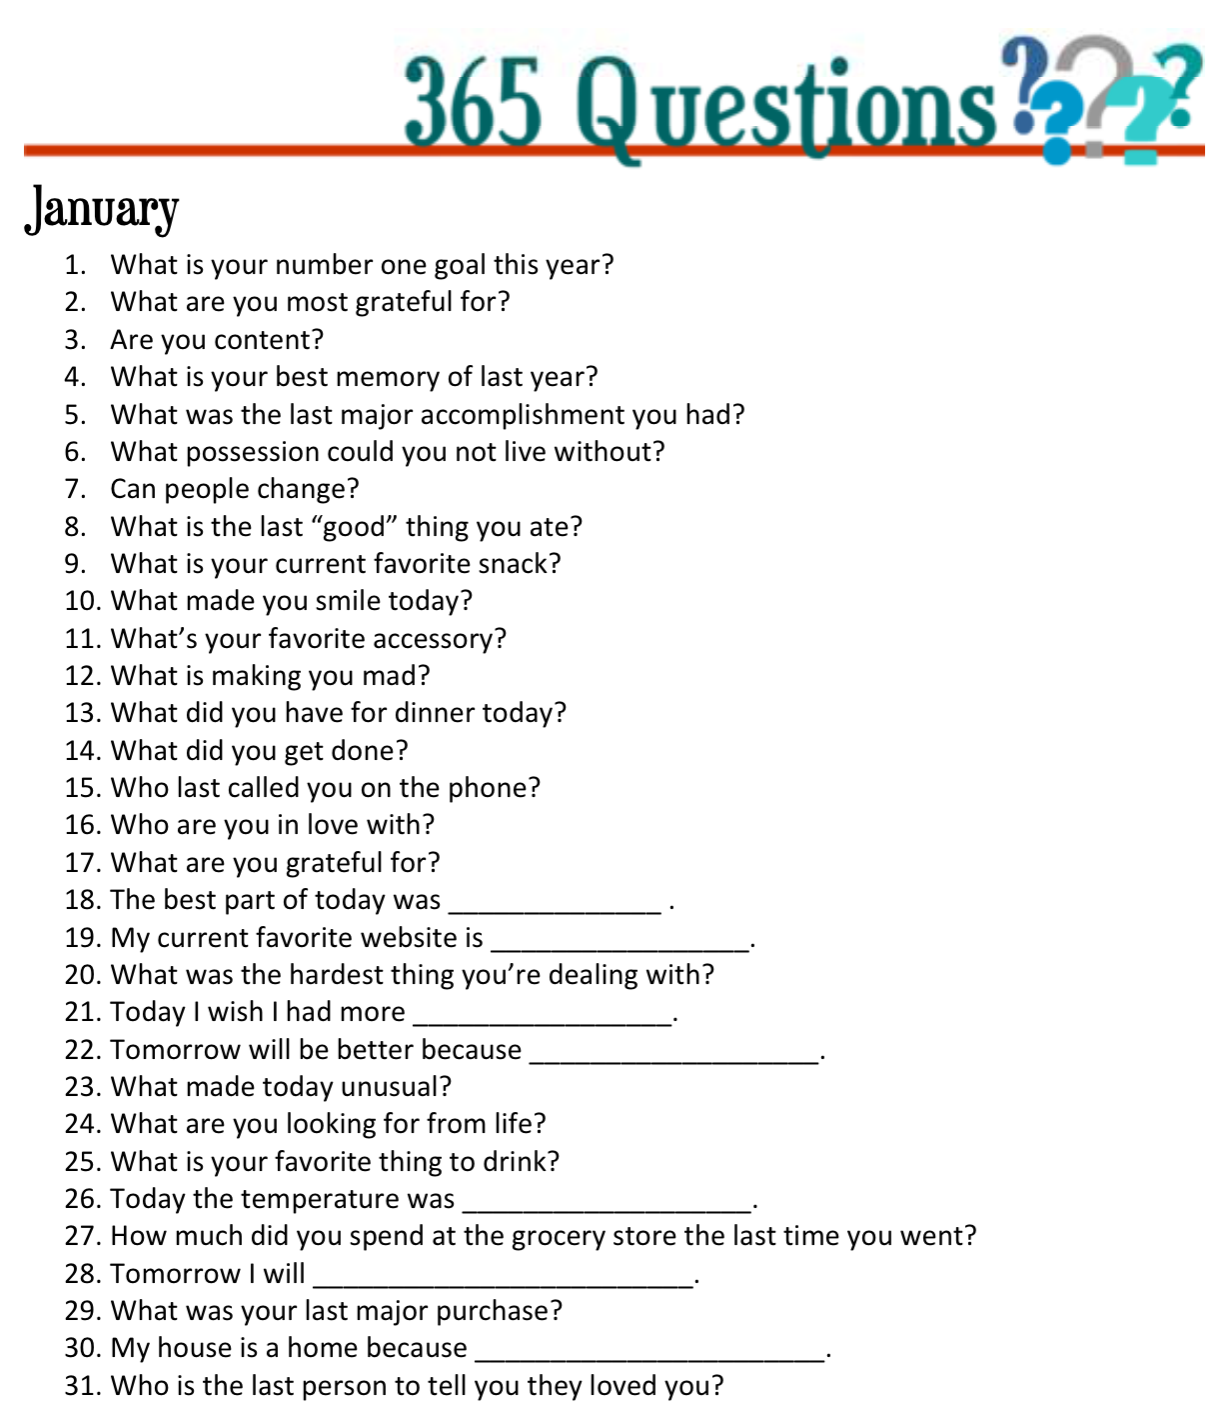 The Lady of the House Speaking: 365 Questions - January 4